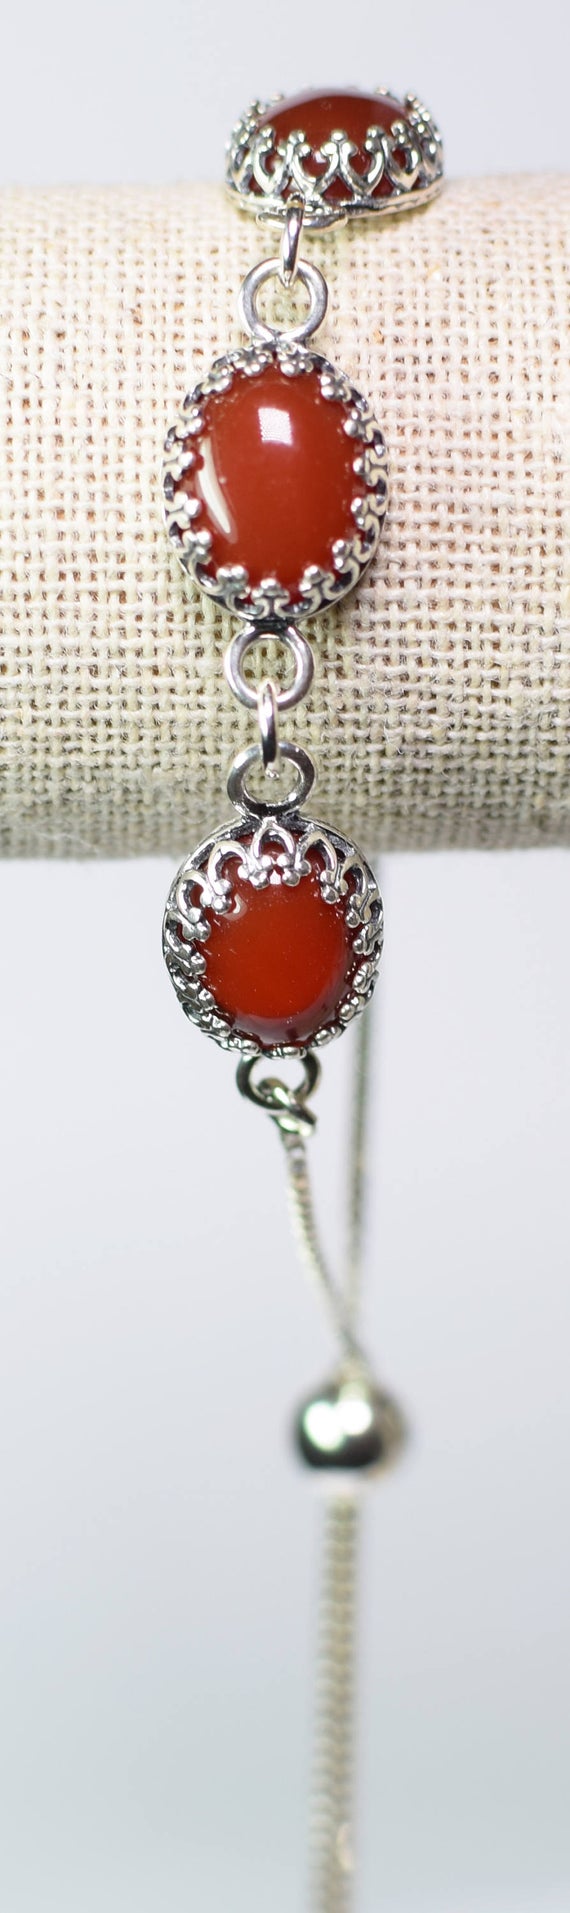 Carnelian Adjustable Bolo Bracelet Or Anklet Made With Genuine 10x8mm Ovals In Crown Settings, Set In 925 Sterling Silver